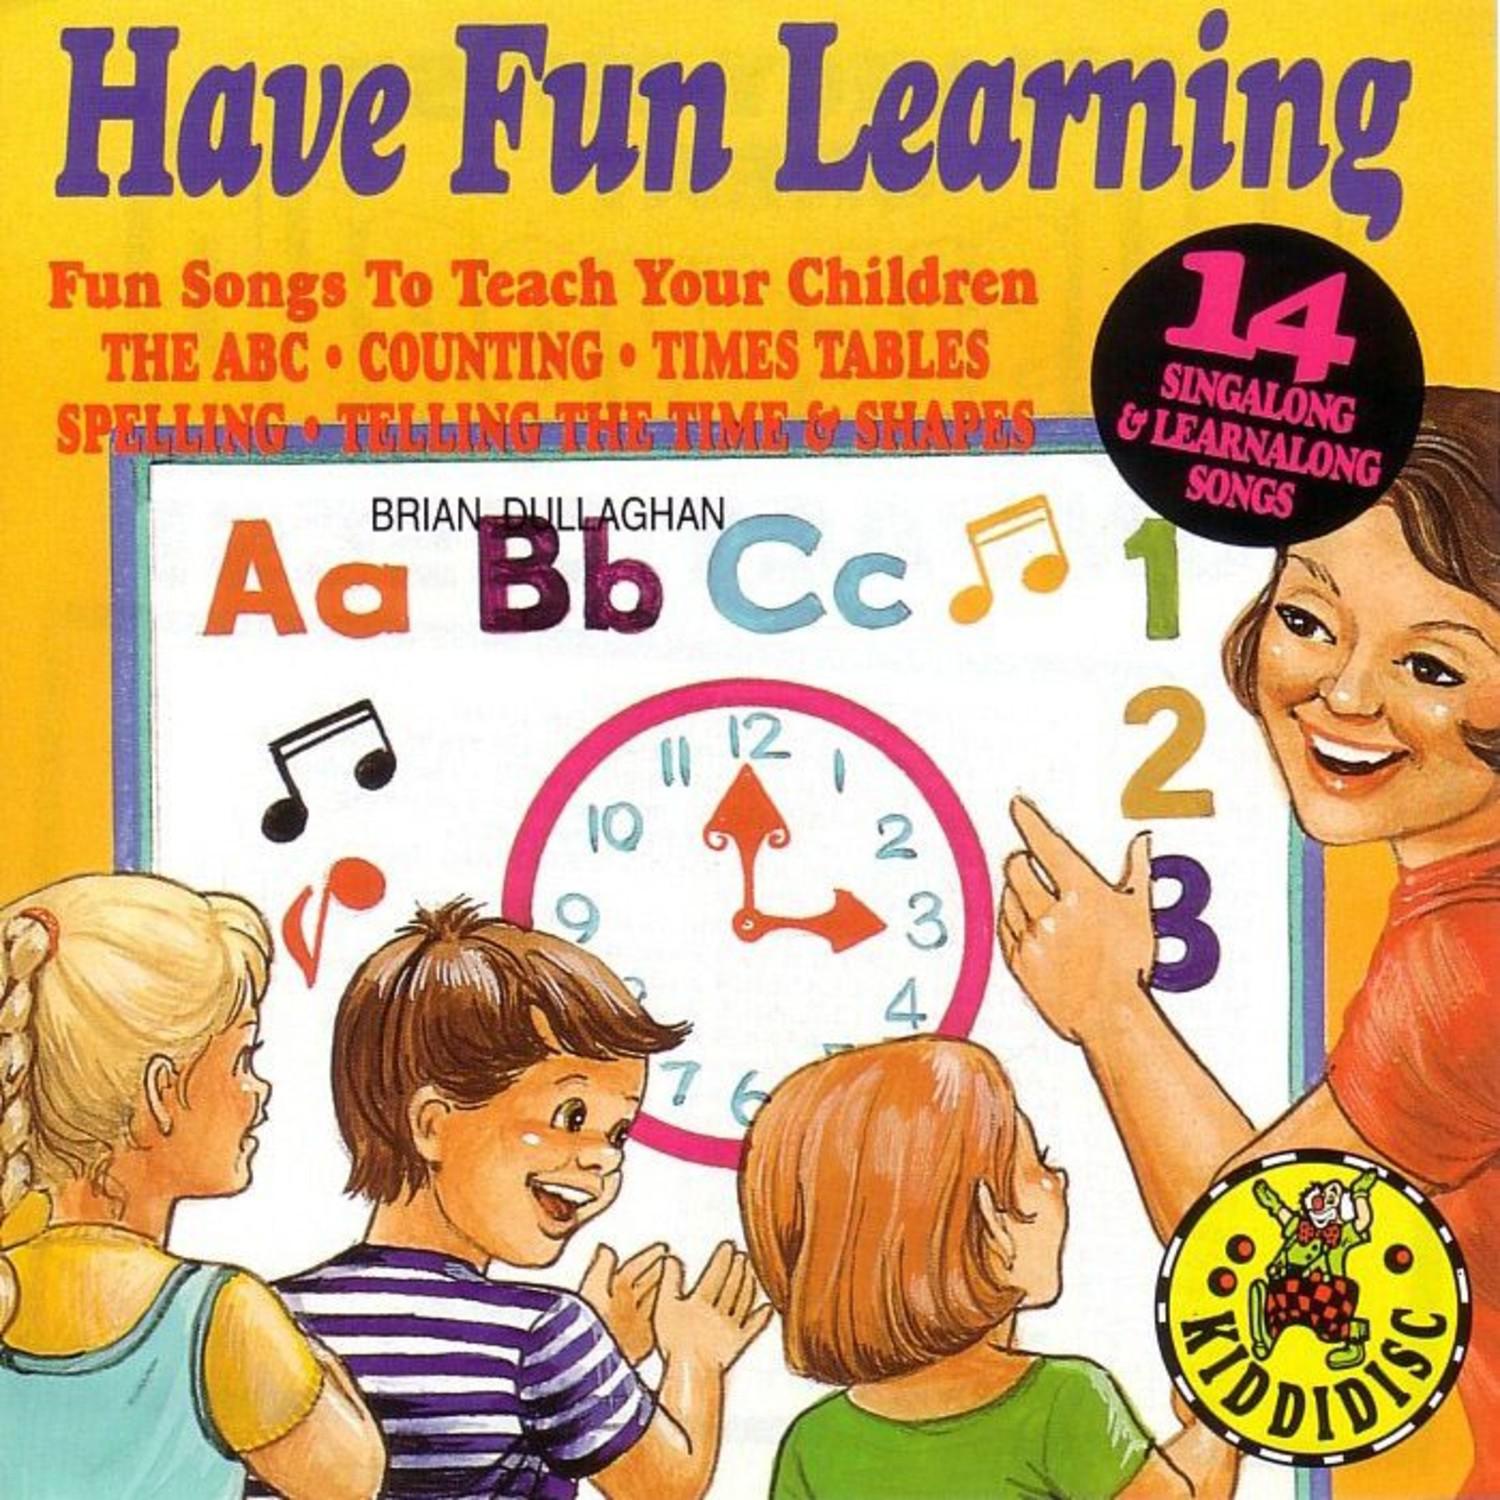 Have Fun Learning - 14 Sing Along & Learn Along Songs